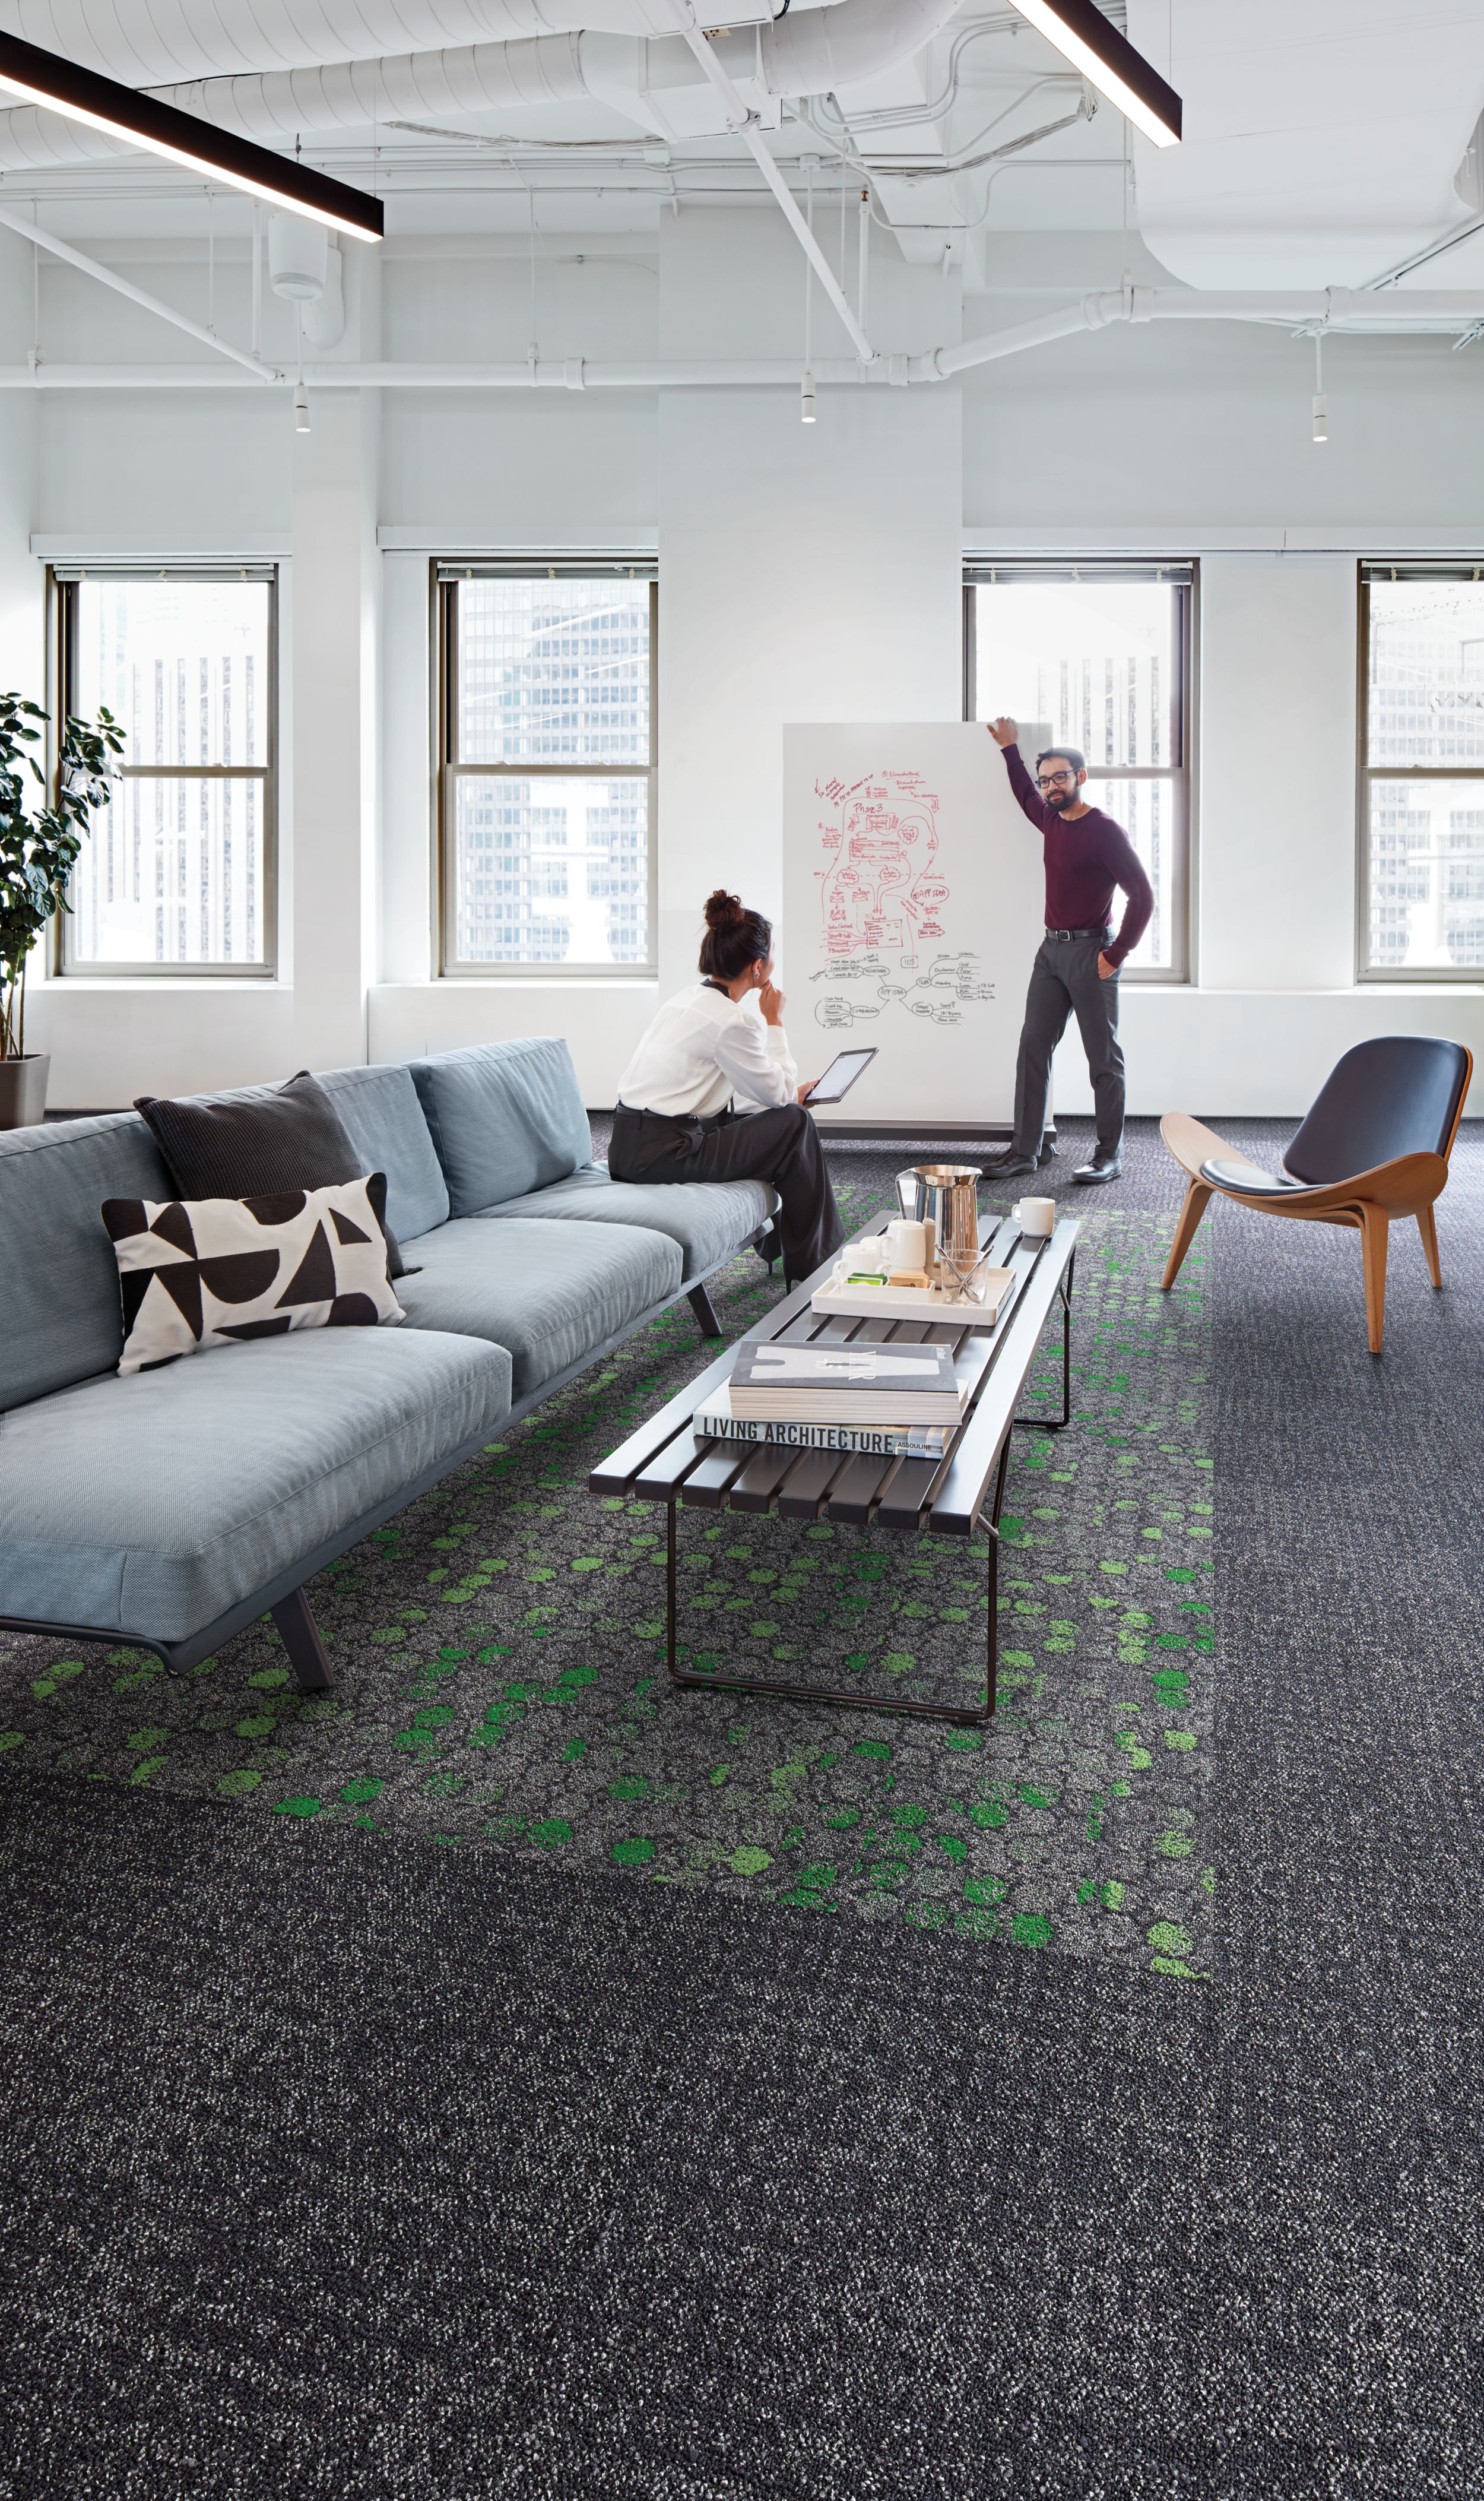 Interface Broome Street and Wheler Street in open office area with people afbeeldingnummer 9